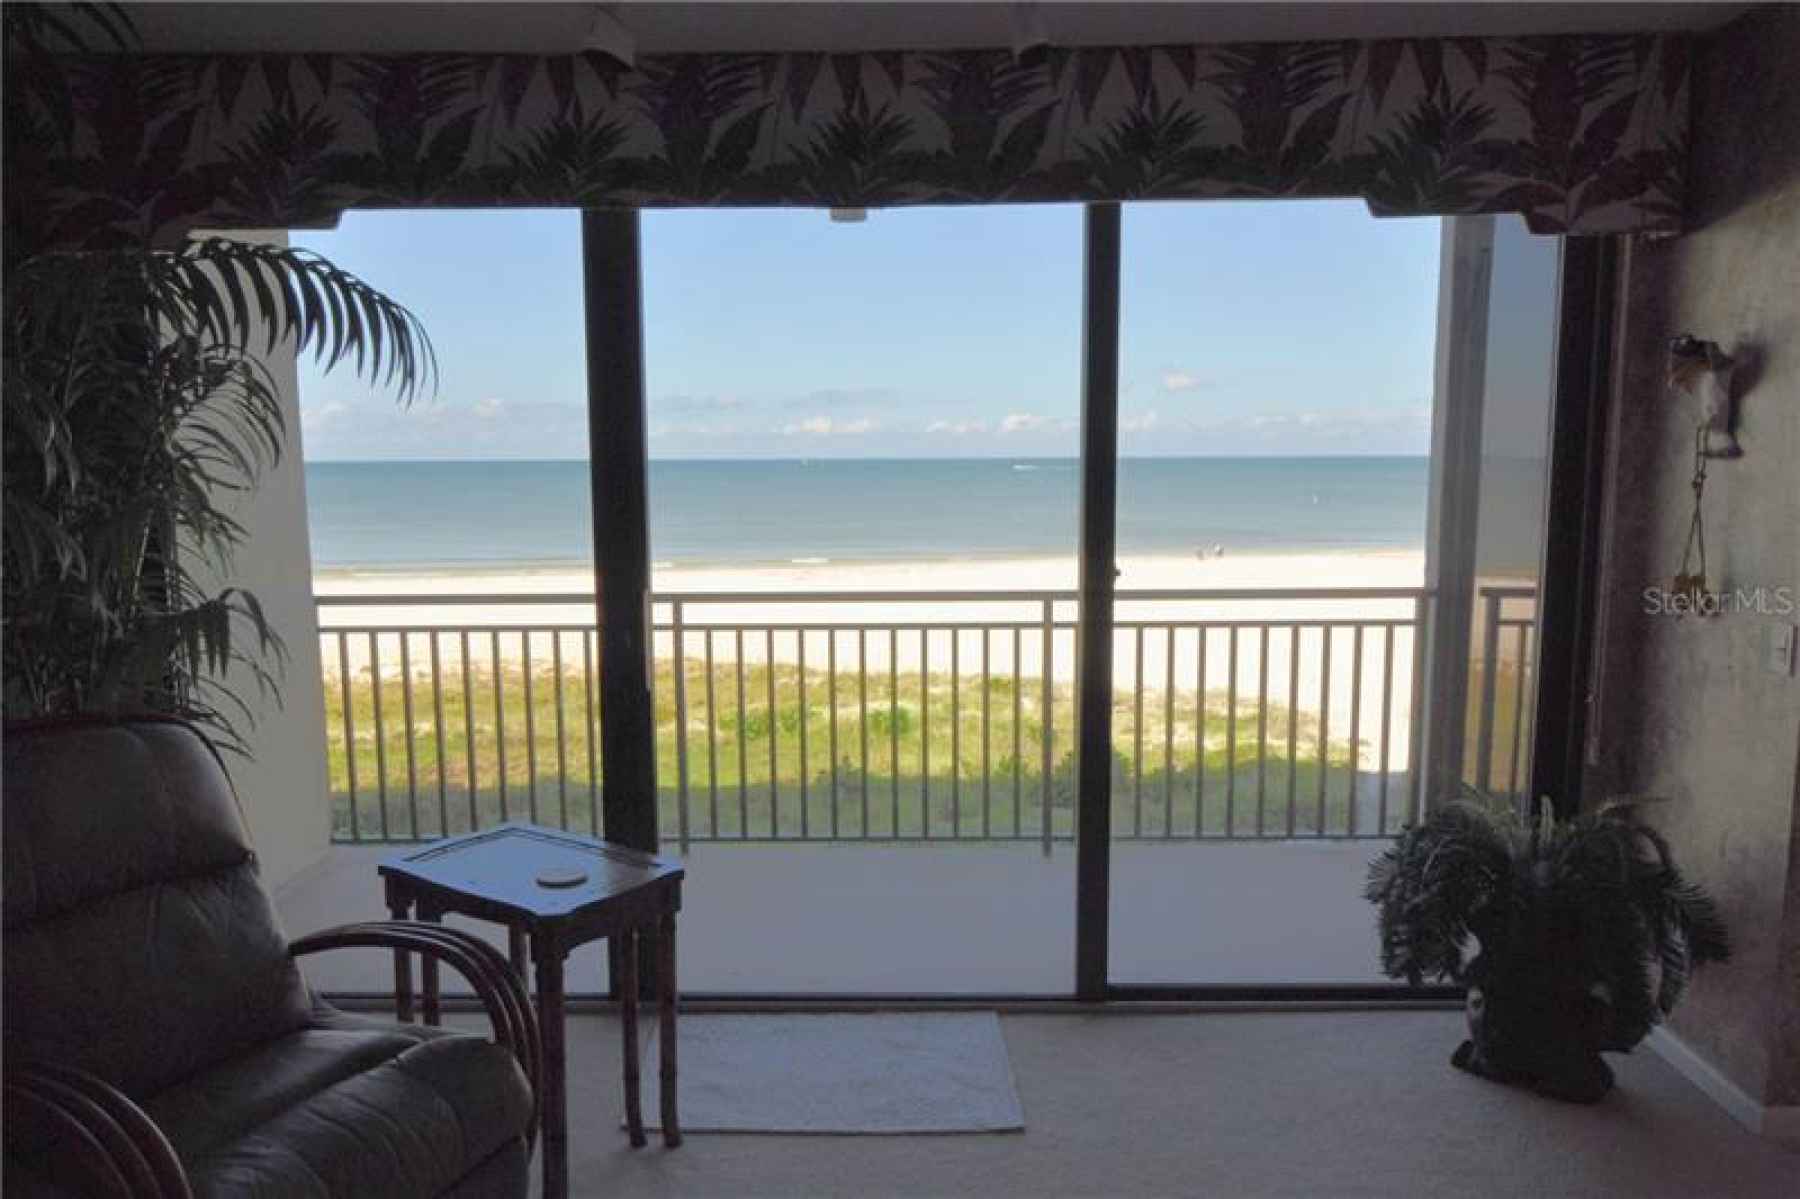 Admire the beautiful Gulf of Mexico from the comfort of your living room